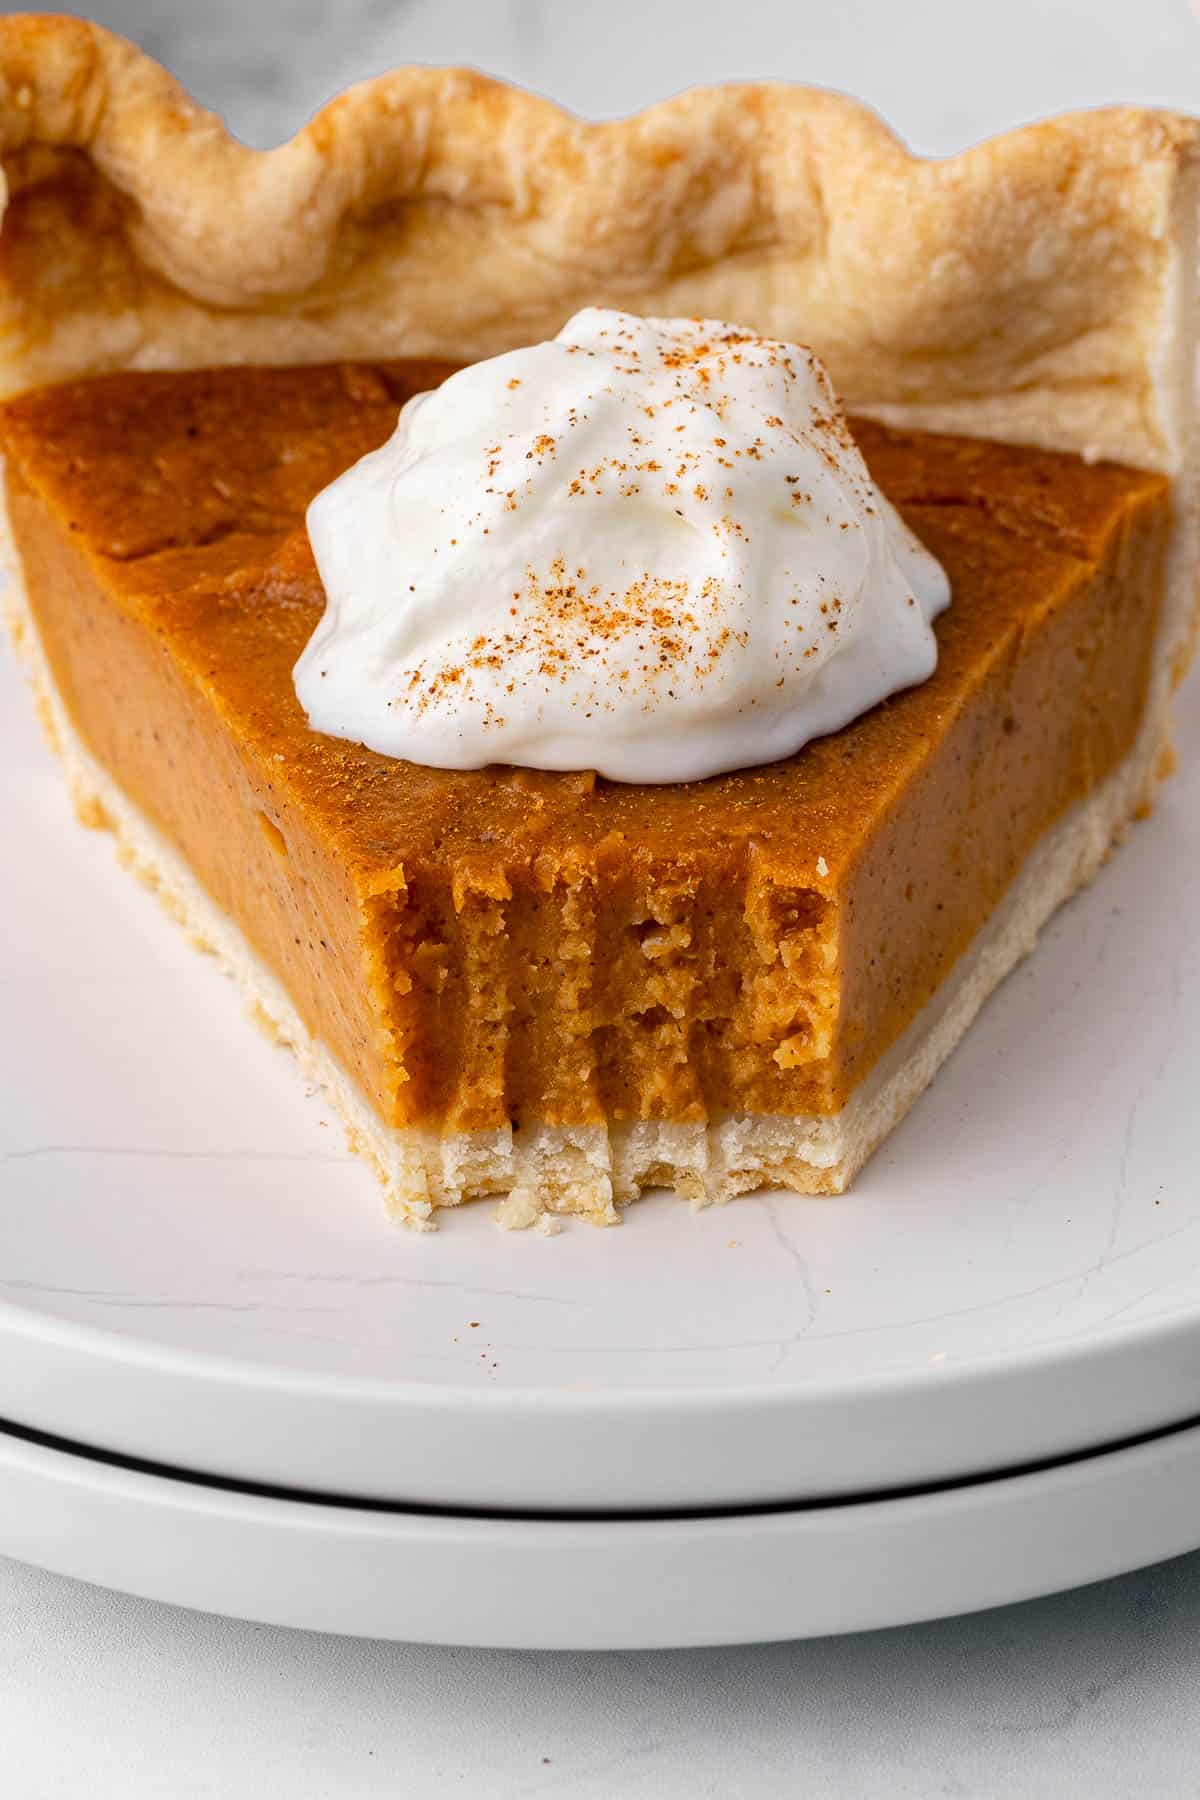 Close up of sweet potato pie with a fork bite taken out to show texture.